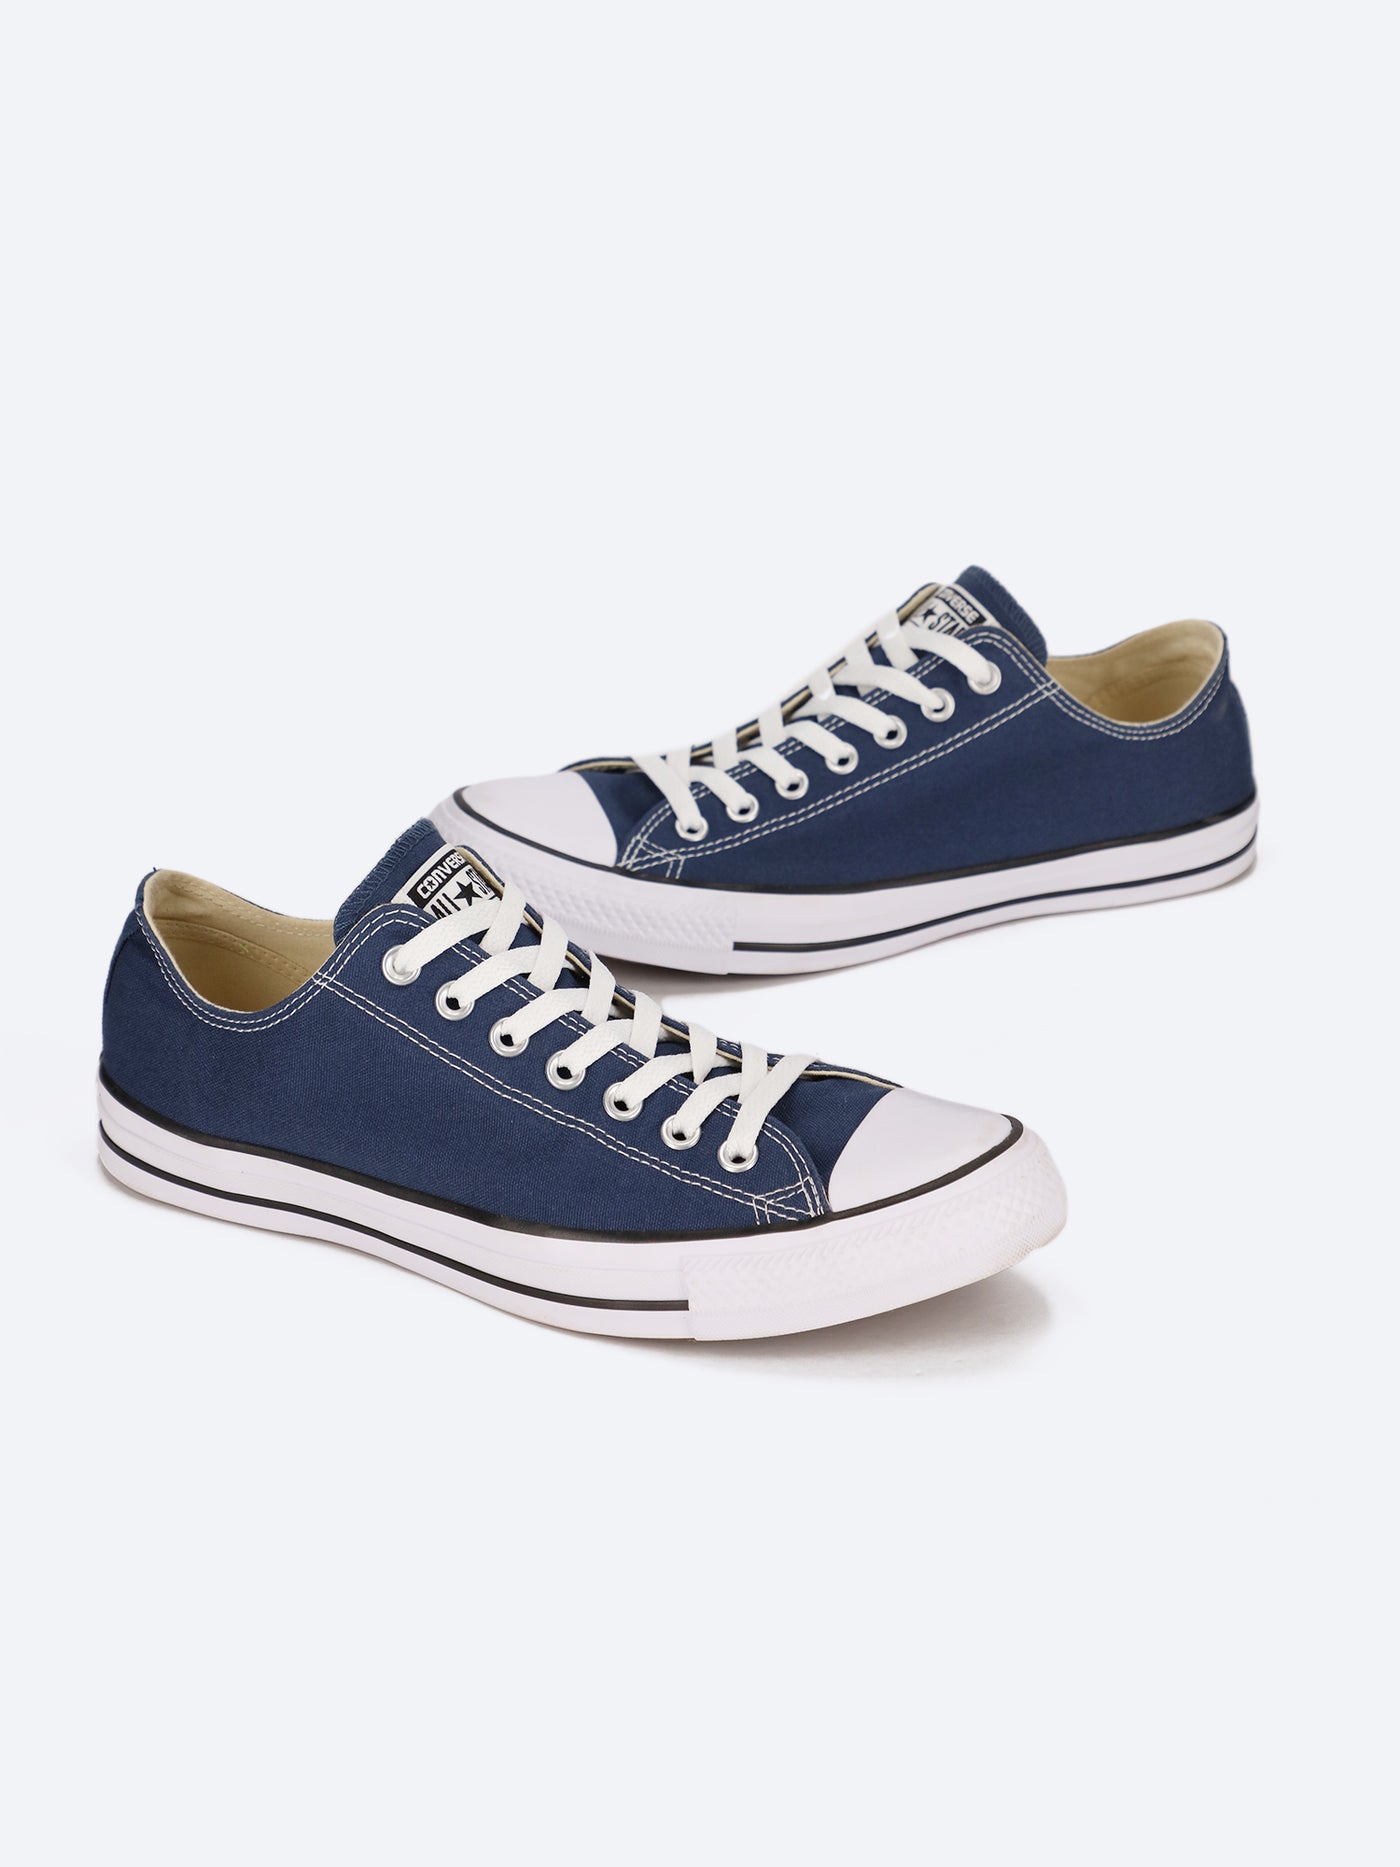 Chuck Taylor All Star Low Top Unisex Sneakers